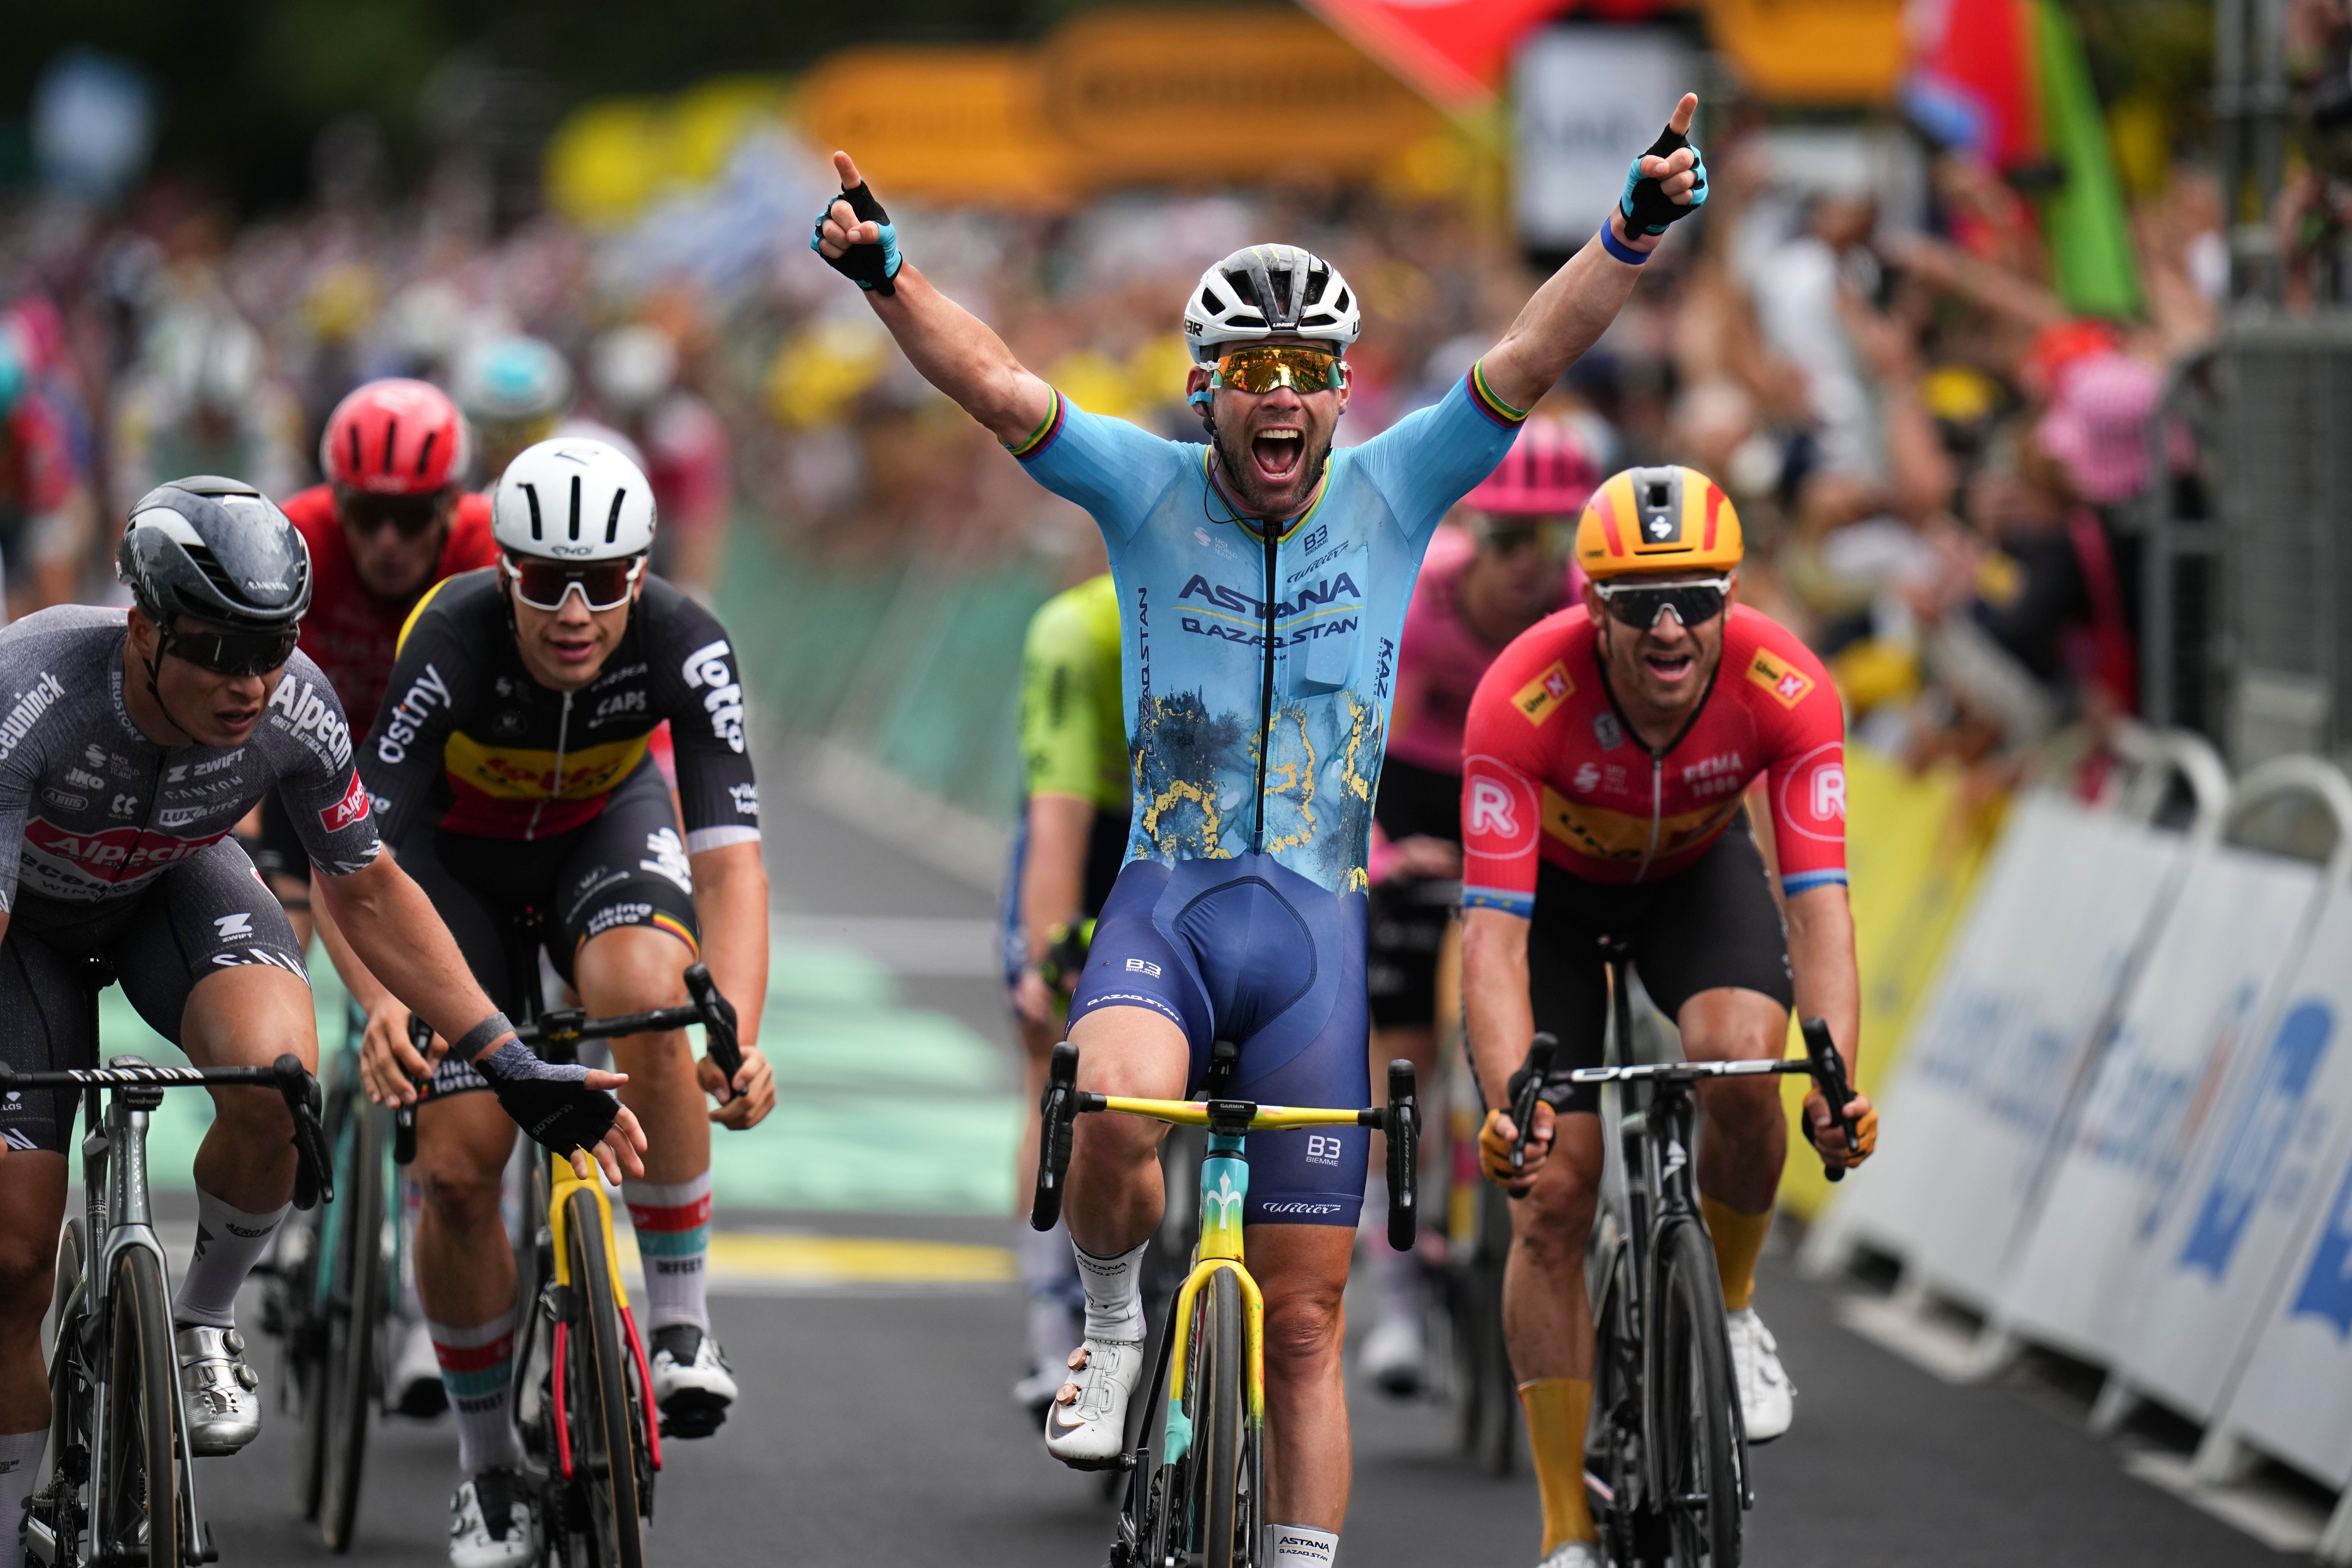 Mark Cavendish celebrates after clinching a record 35th Tour de France stage